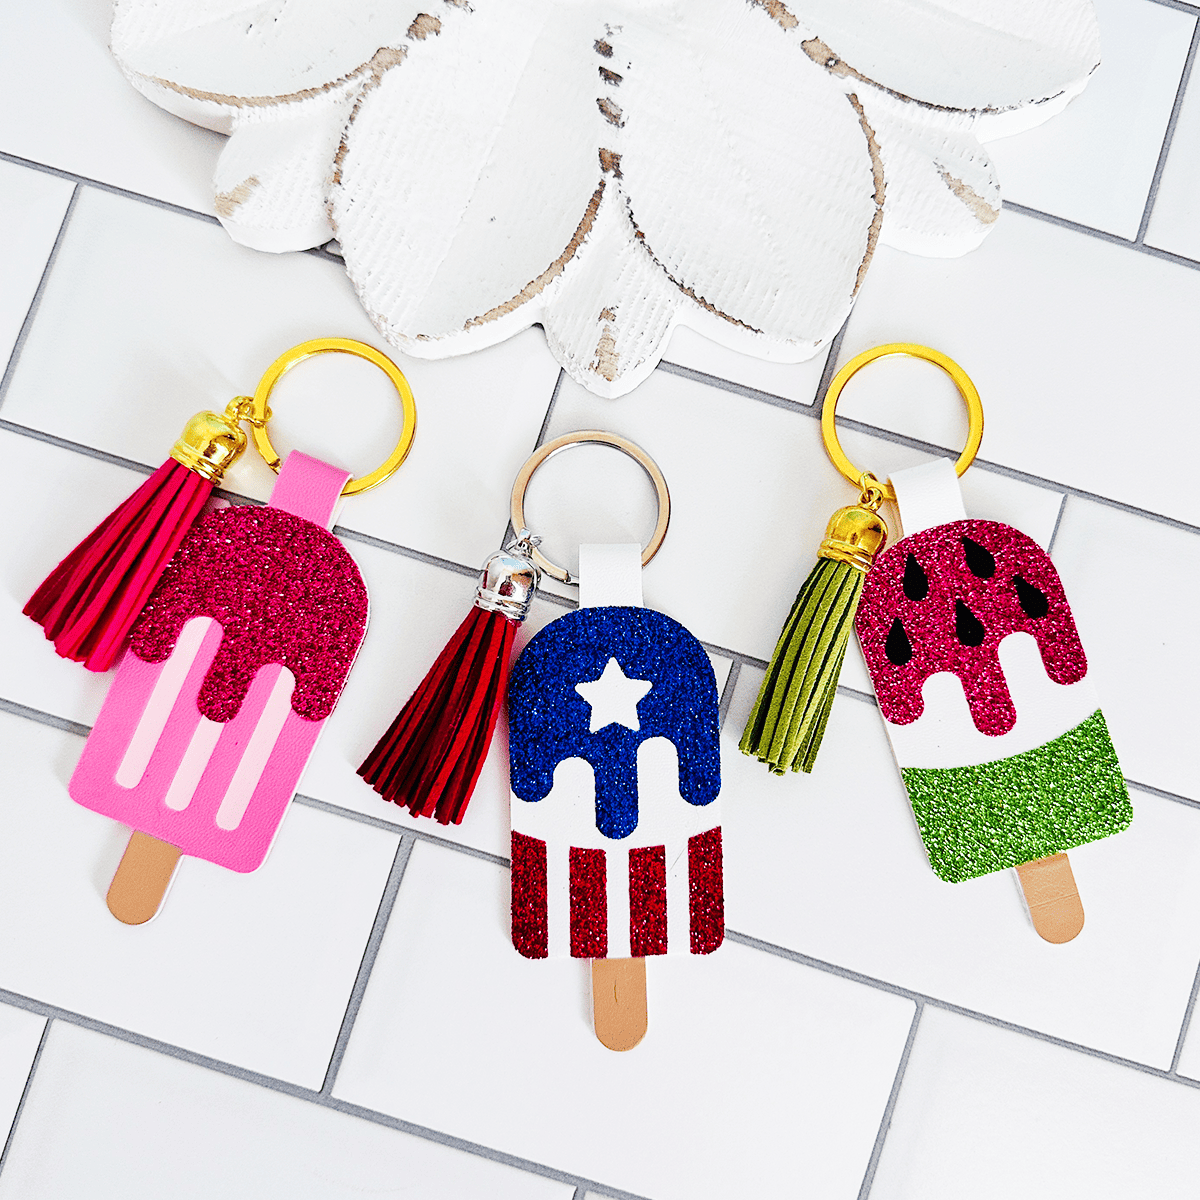 How to Make Summer Popsicle Faux Leather Keychains with a Cricut